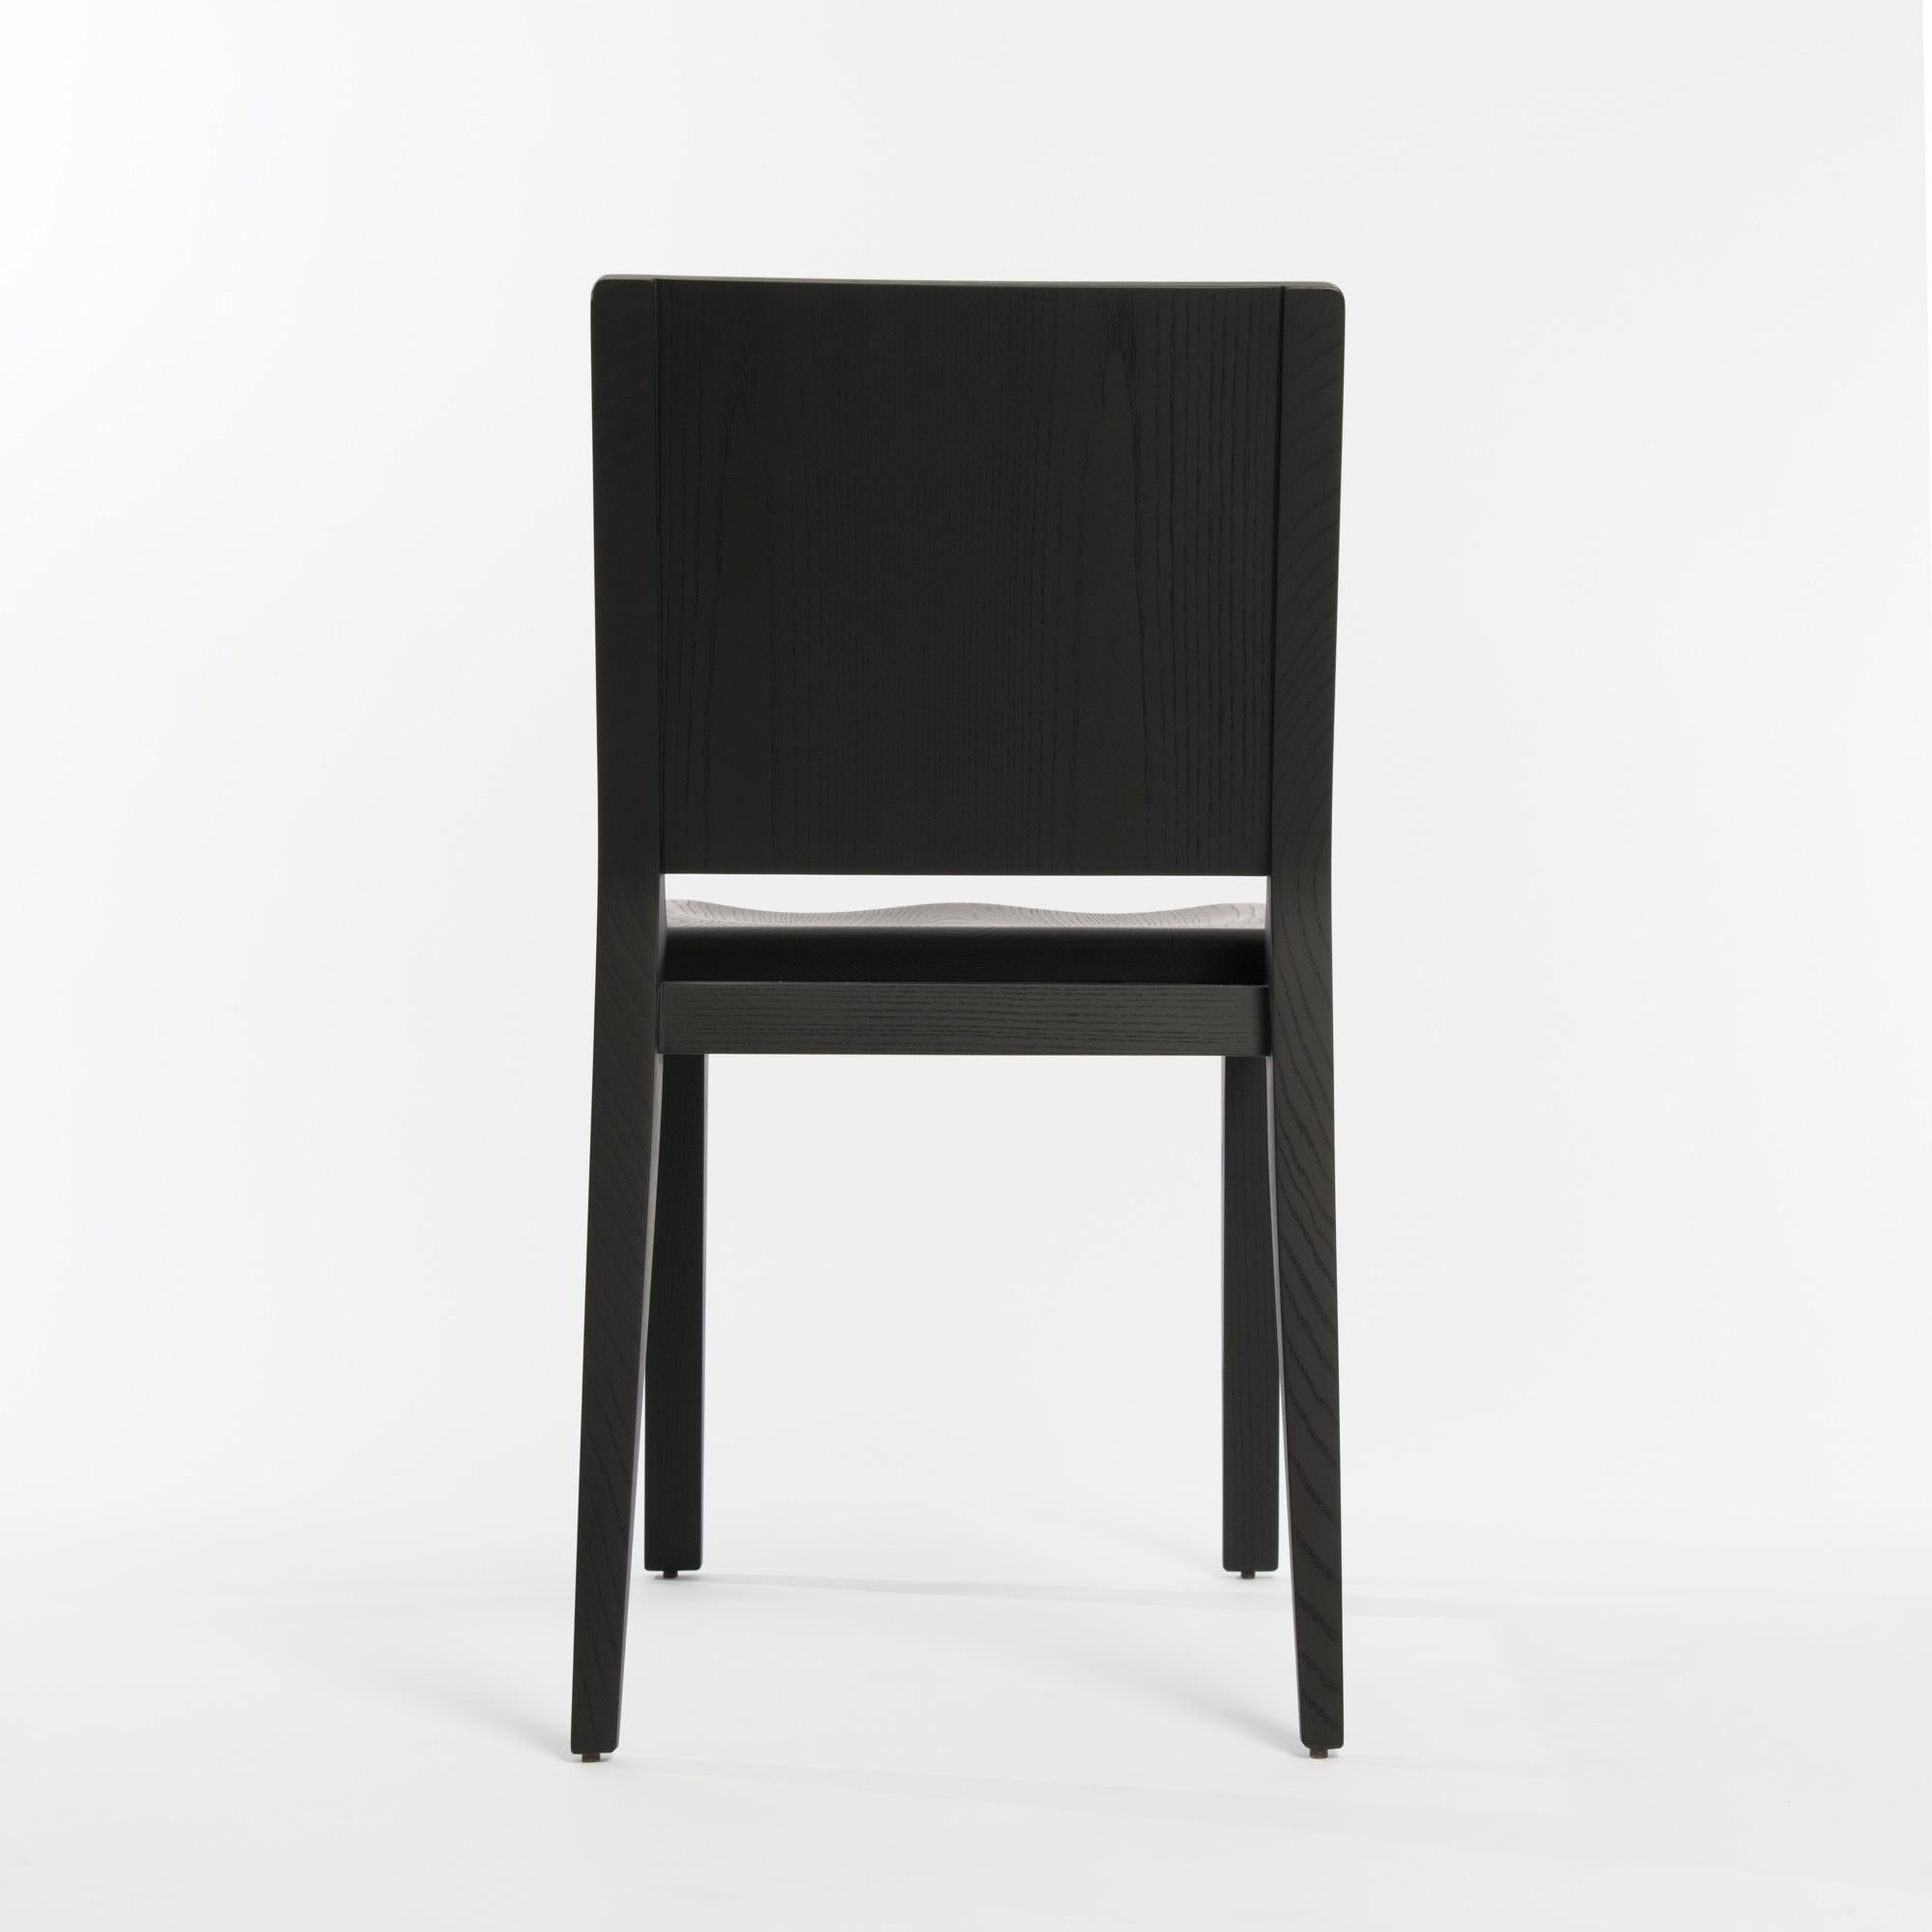 Contemporary Black Ash Minimal Chair - om5.0 by mjiila For Sale